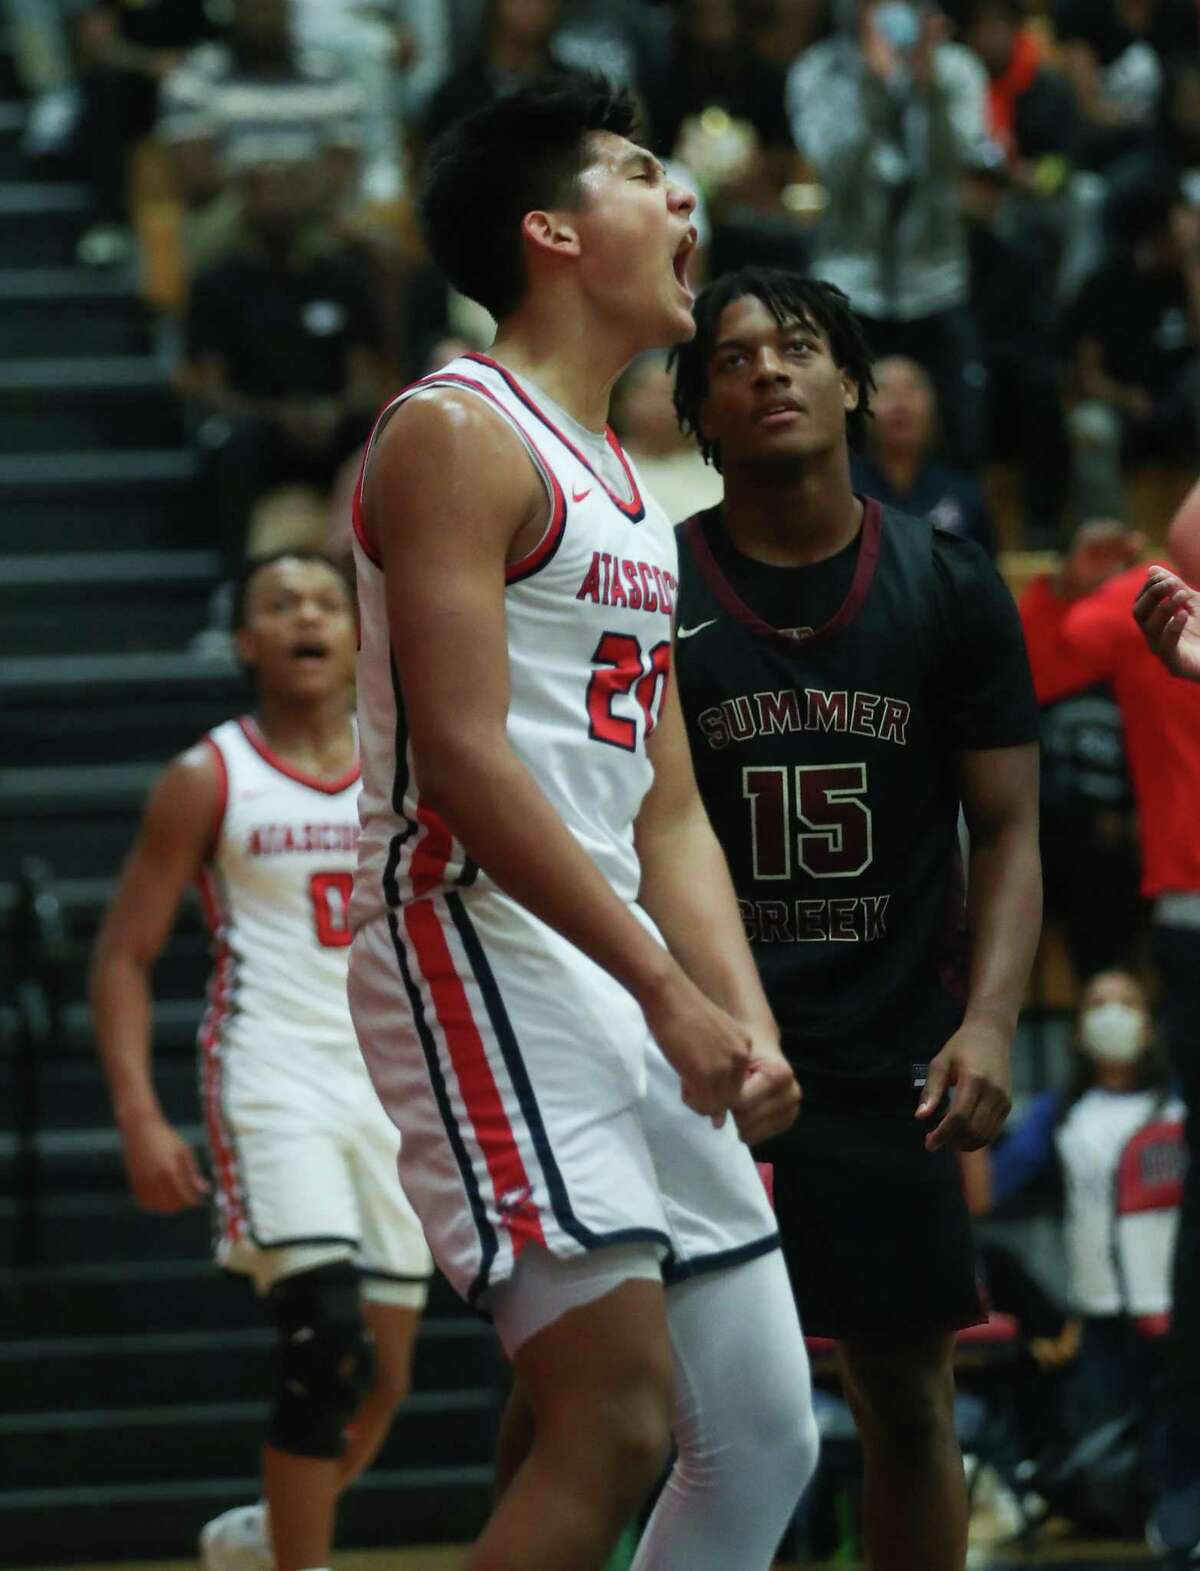 Atascocita’s Landyn Jumawan (20) reacts after scoring and drawing a foul against Summer Creek during a District 21-6A high school basketball game Friday, Dec. 17, 2021 in Humble.